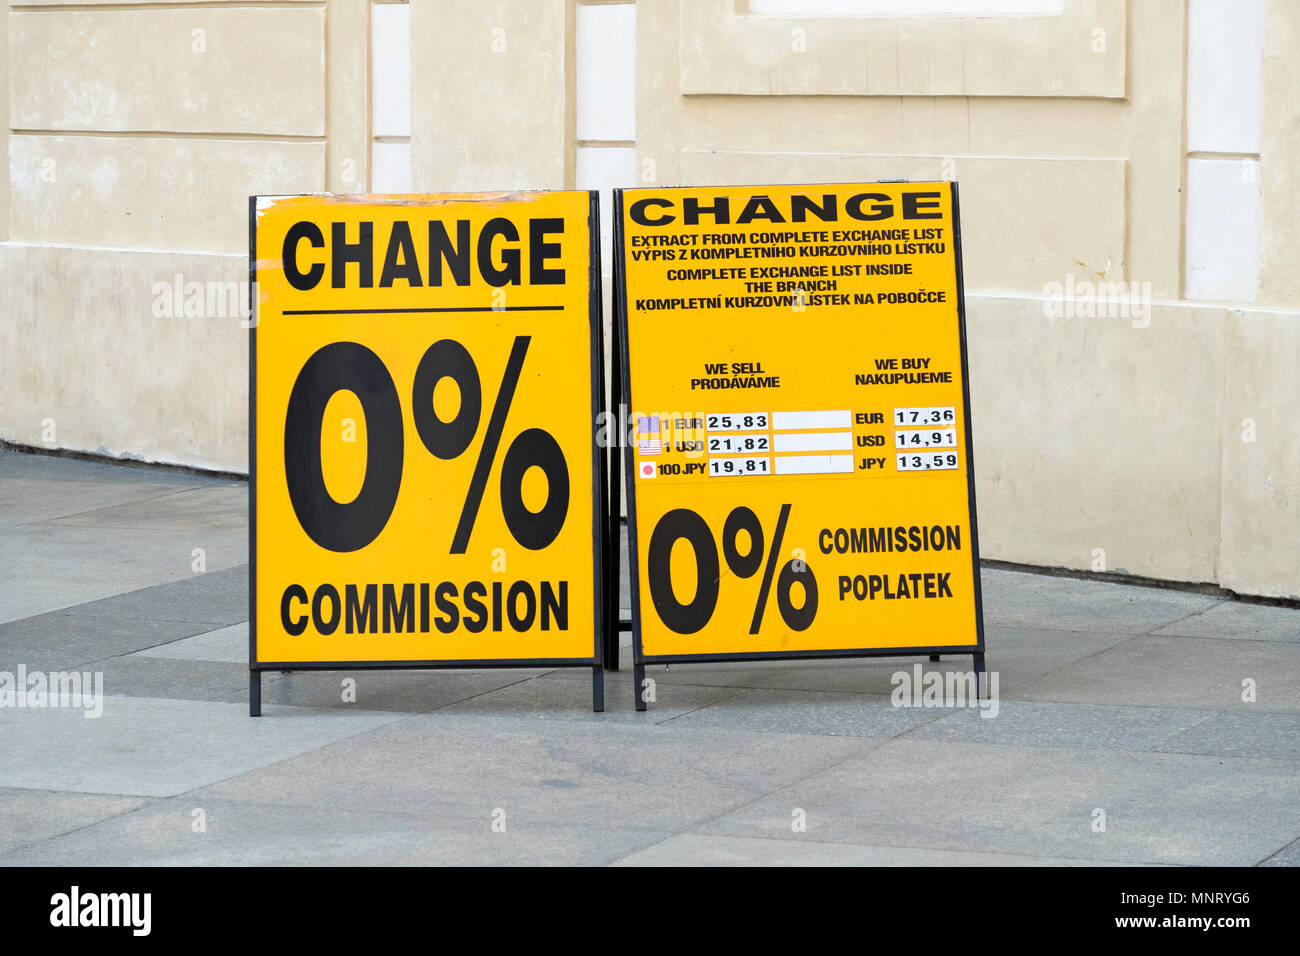 A deceptive  misleading sign by a money changer  in Prague boasting about no commissions but rigging the exchange rate. Czech Republic. Stock Photo